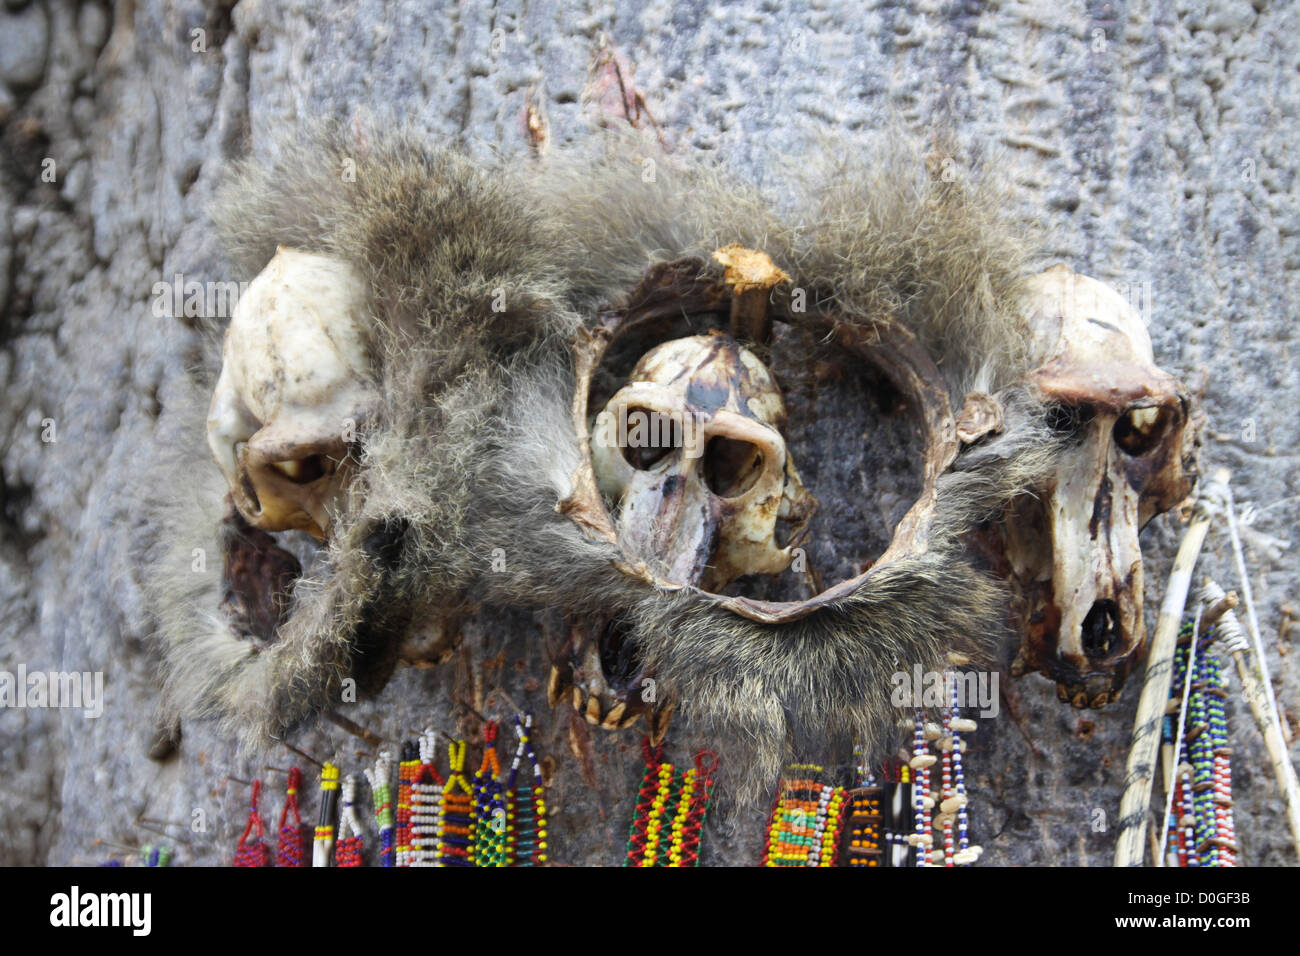 Africa, Tanzania, Lake Eyasi, ornamental skulls and beads used by the local witch doctor Stock Photo